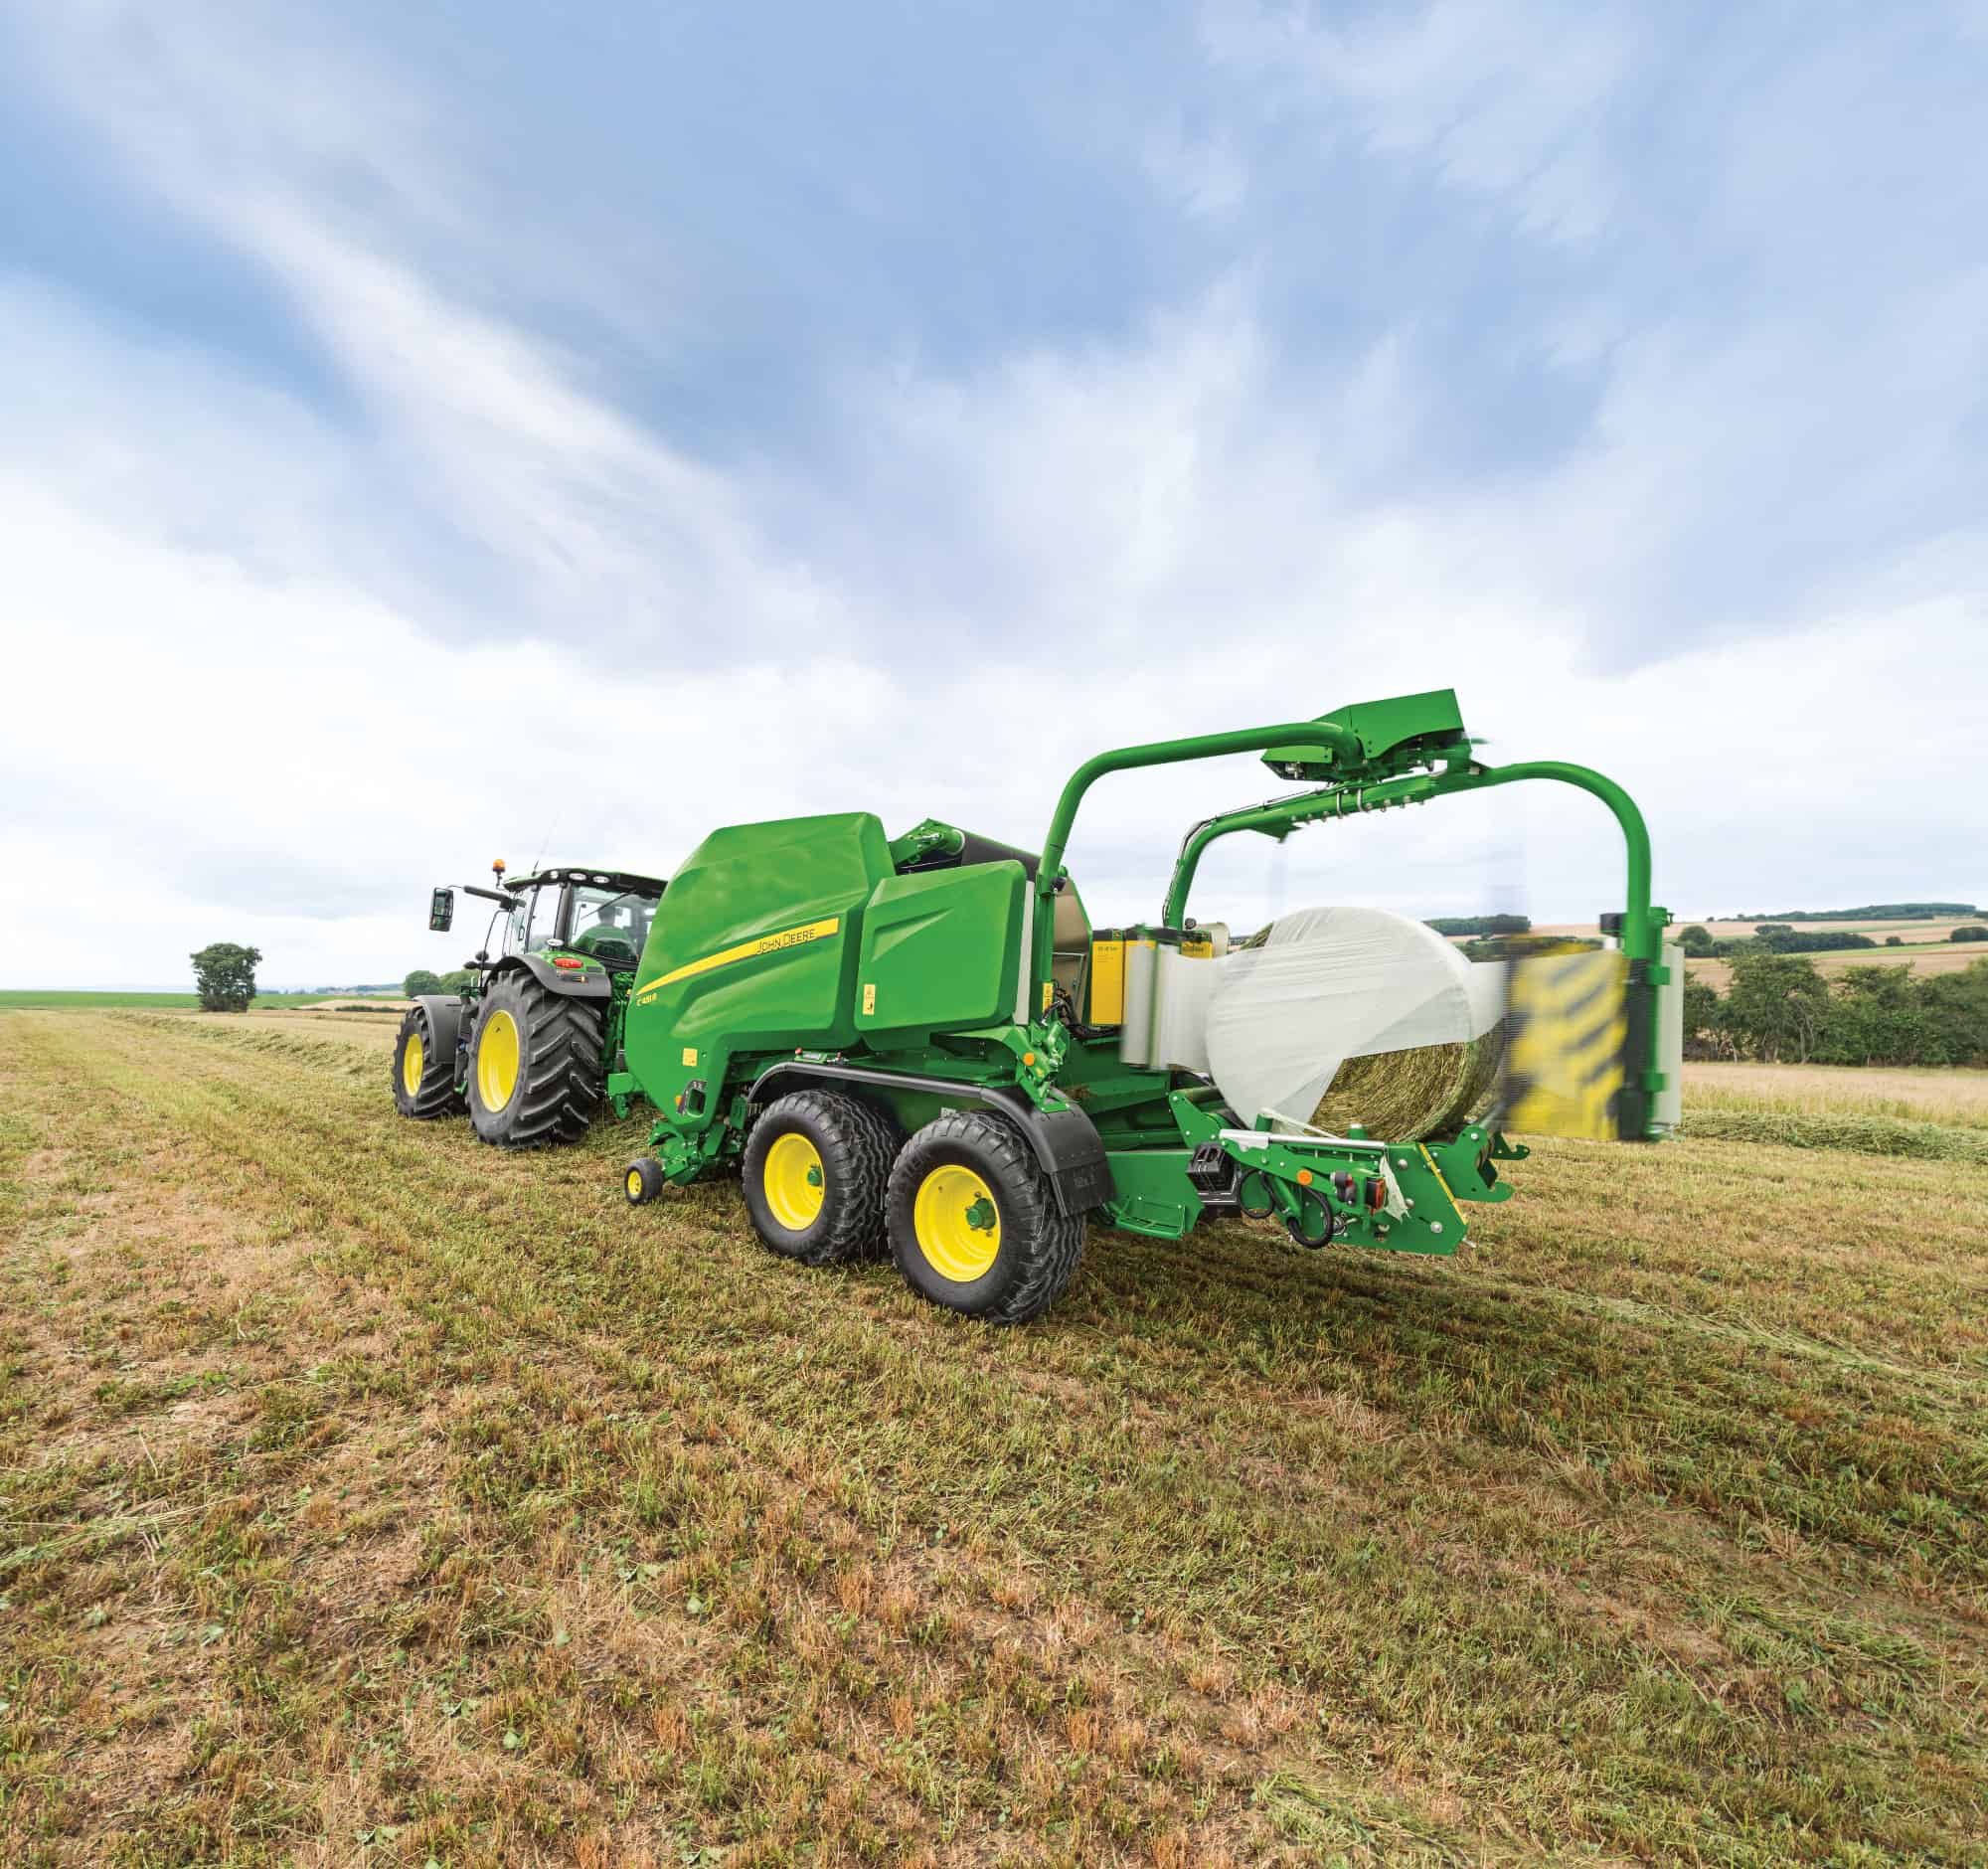 New variable chamber wrapping balers from John Deere